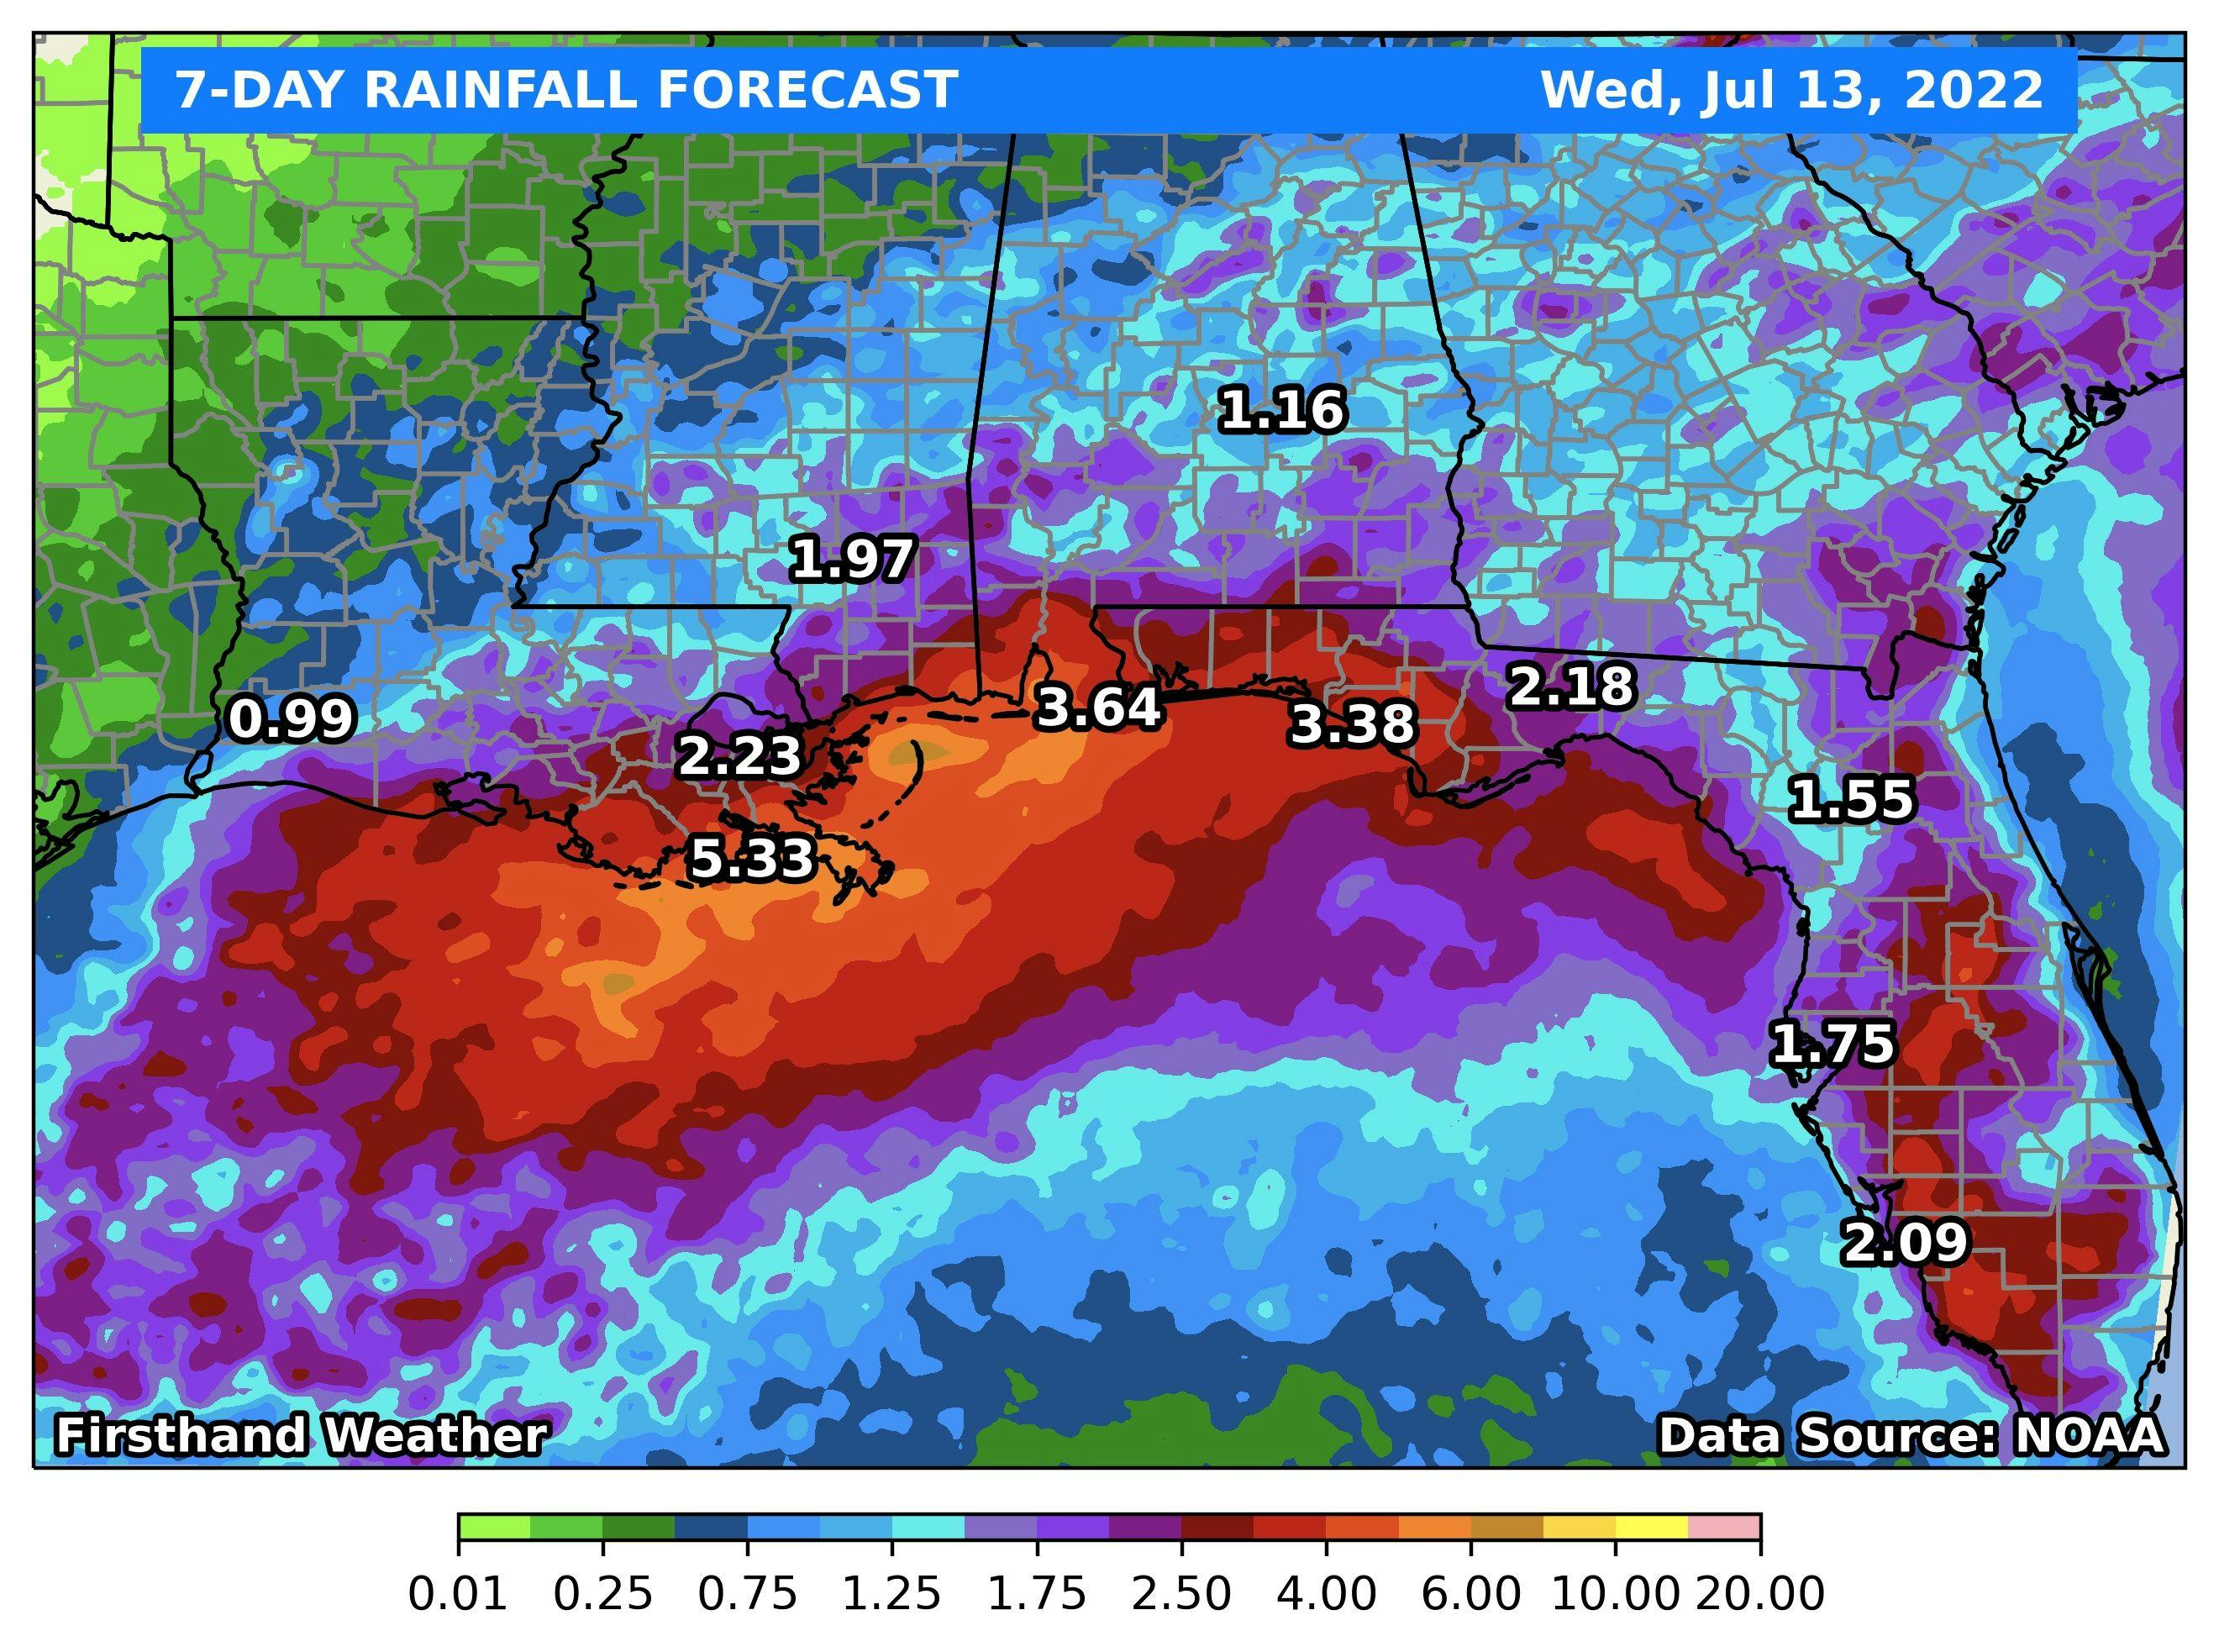 7-day rainfall forecast for Southeast and Florida: July 13-20, 2022